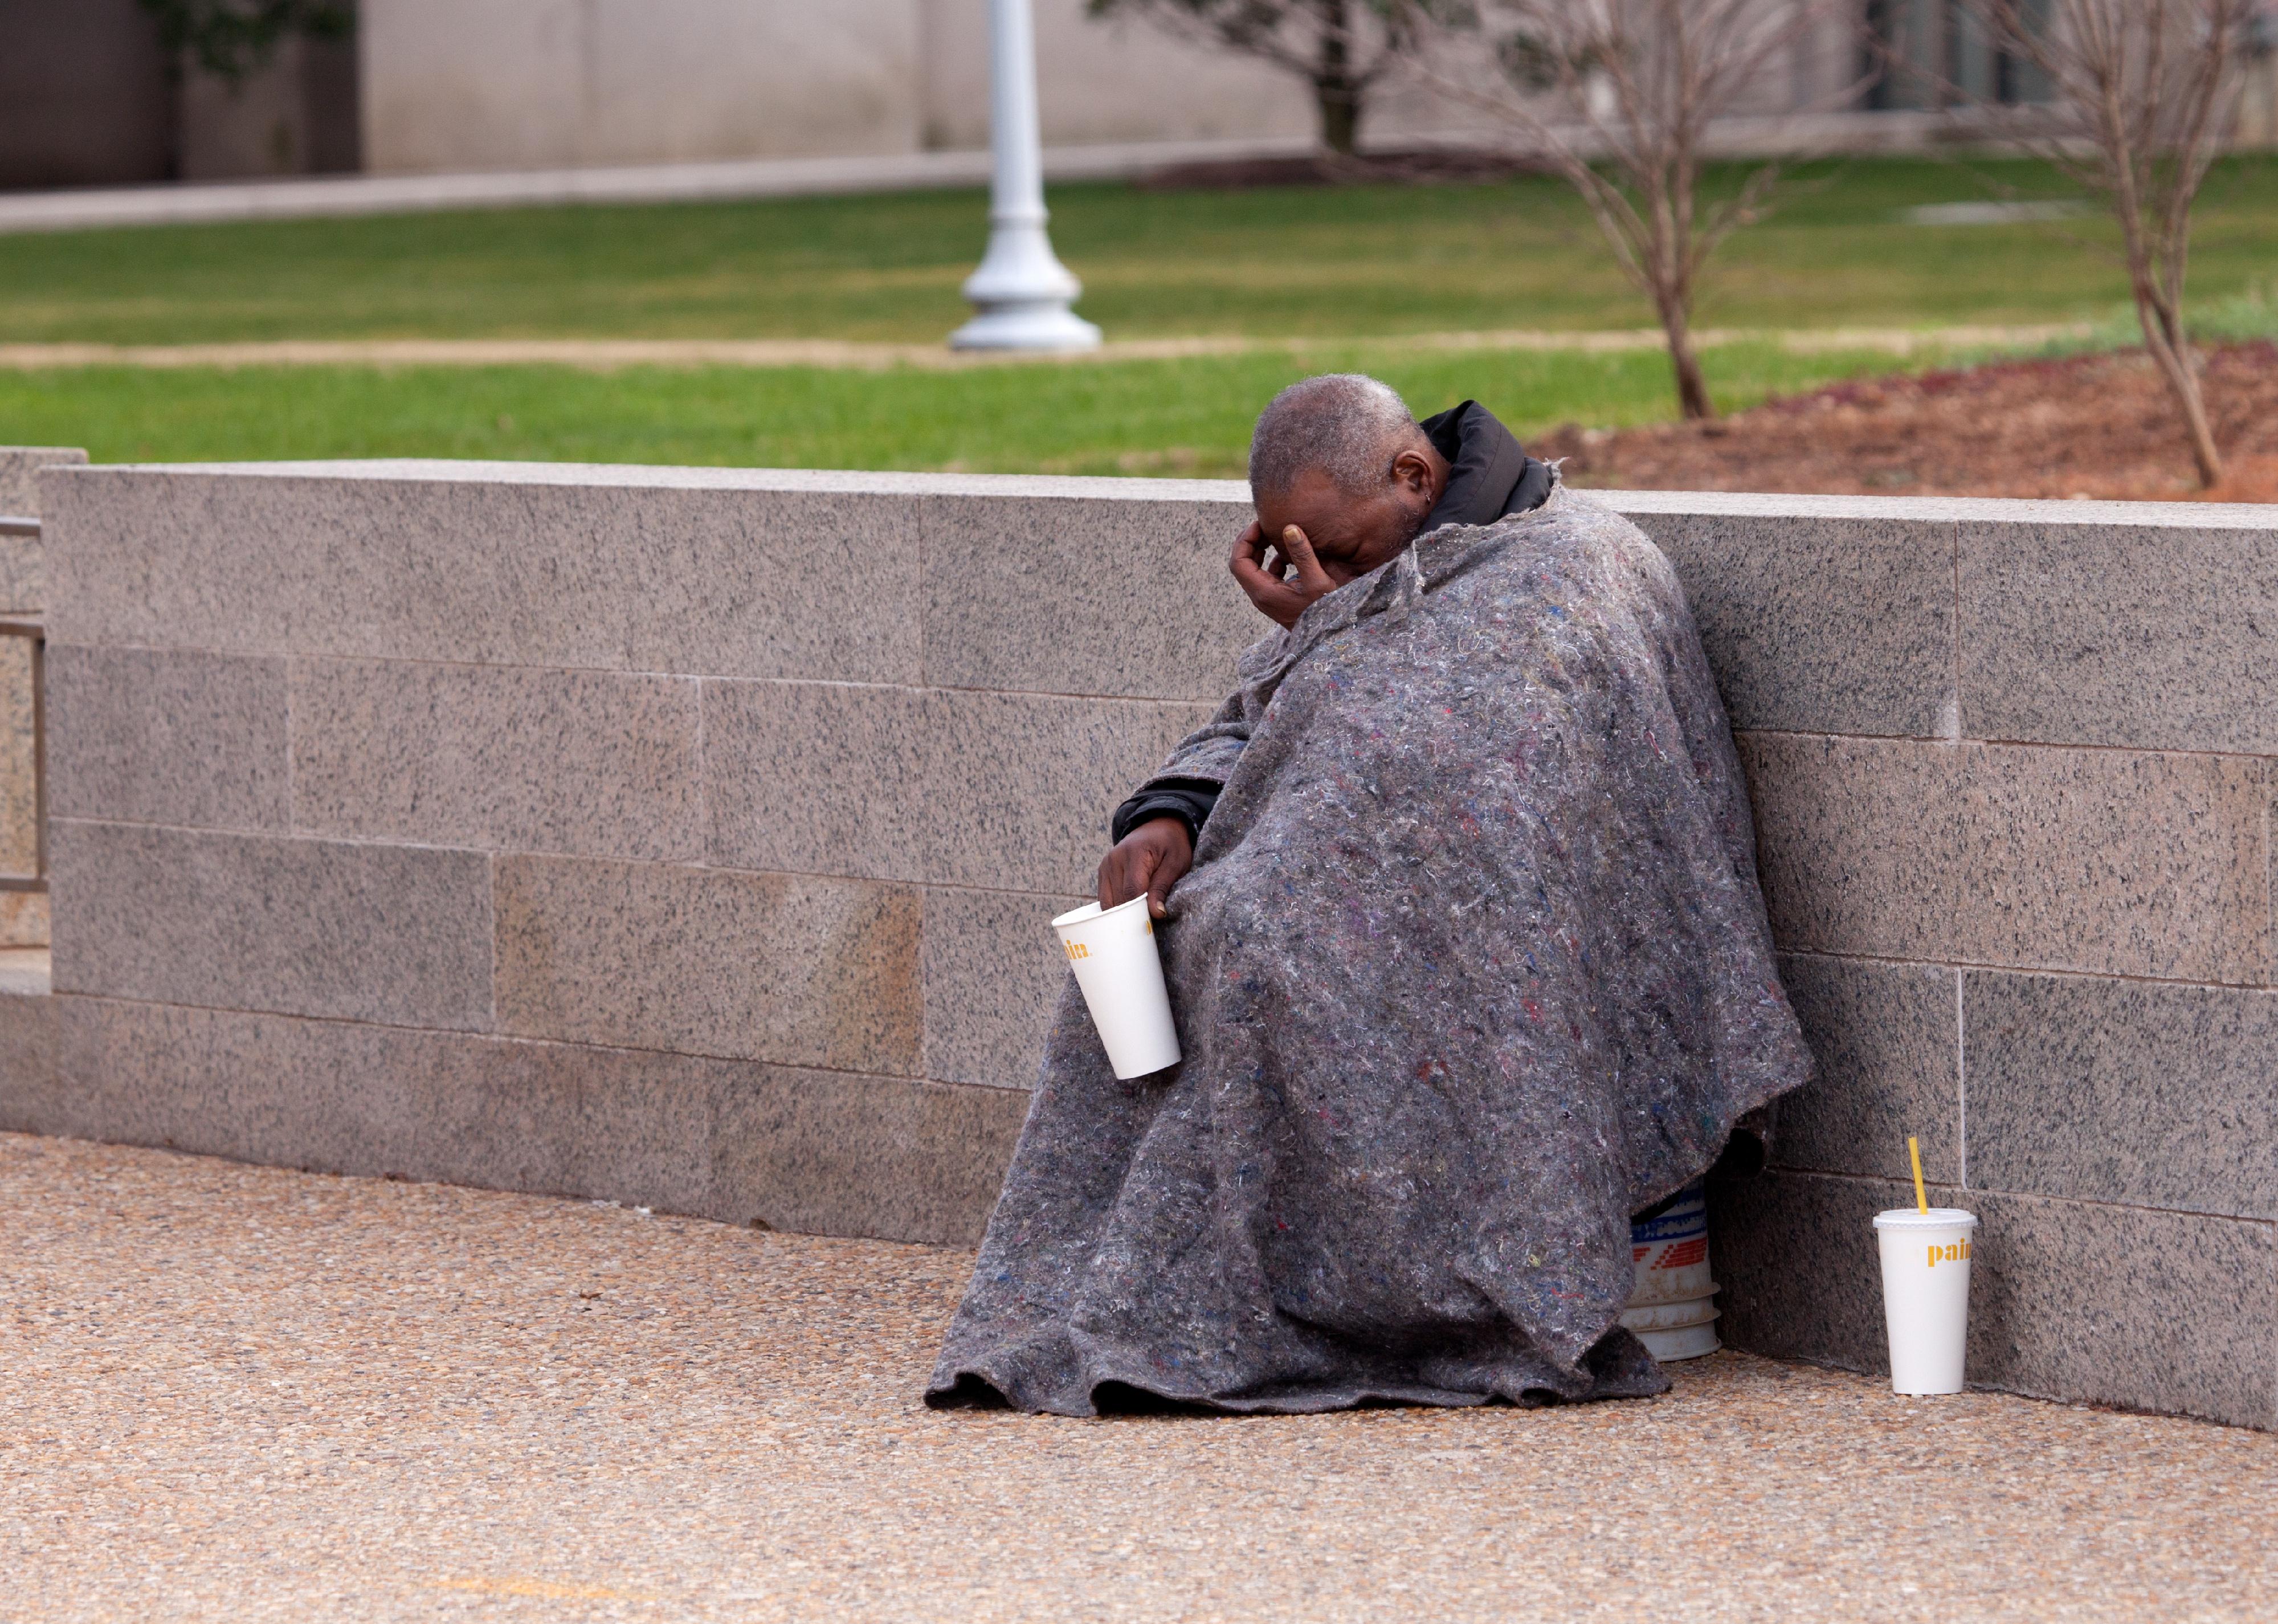 Homeless man hangs his head while sitting on the street try to collect money.